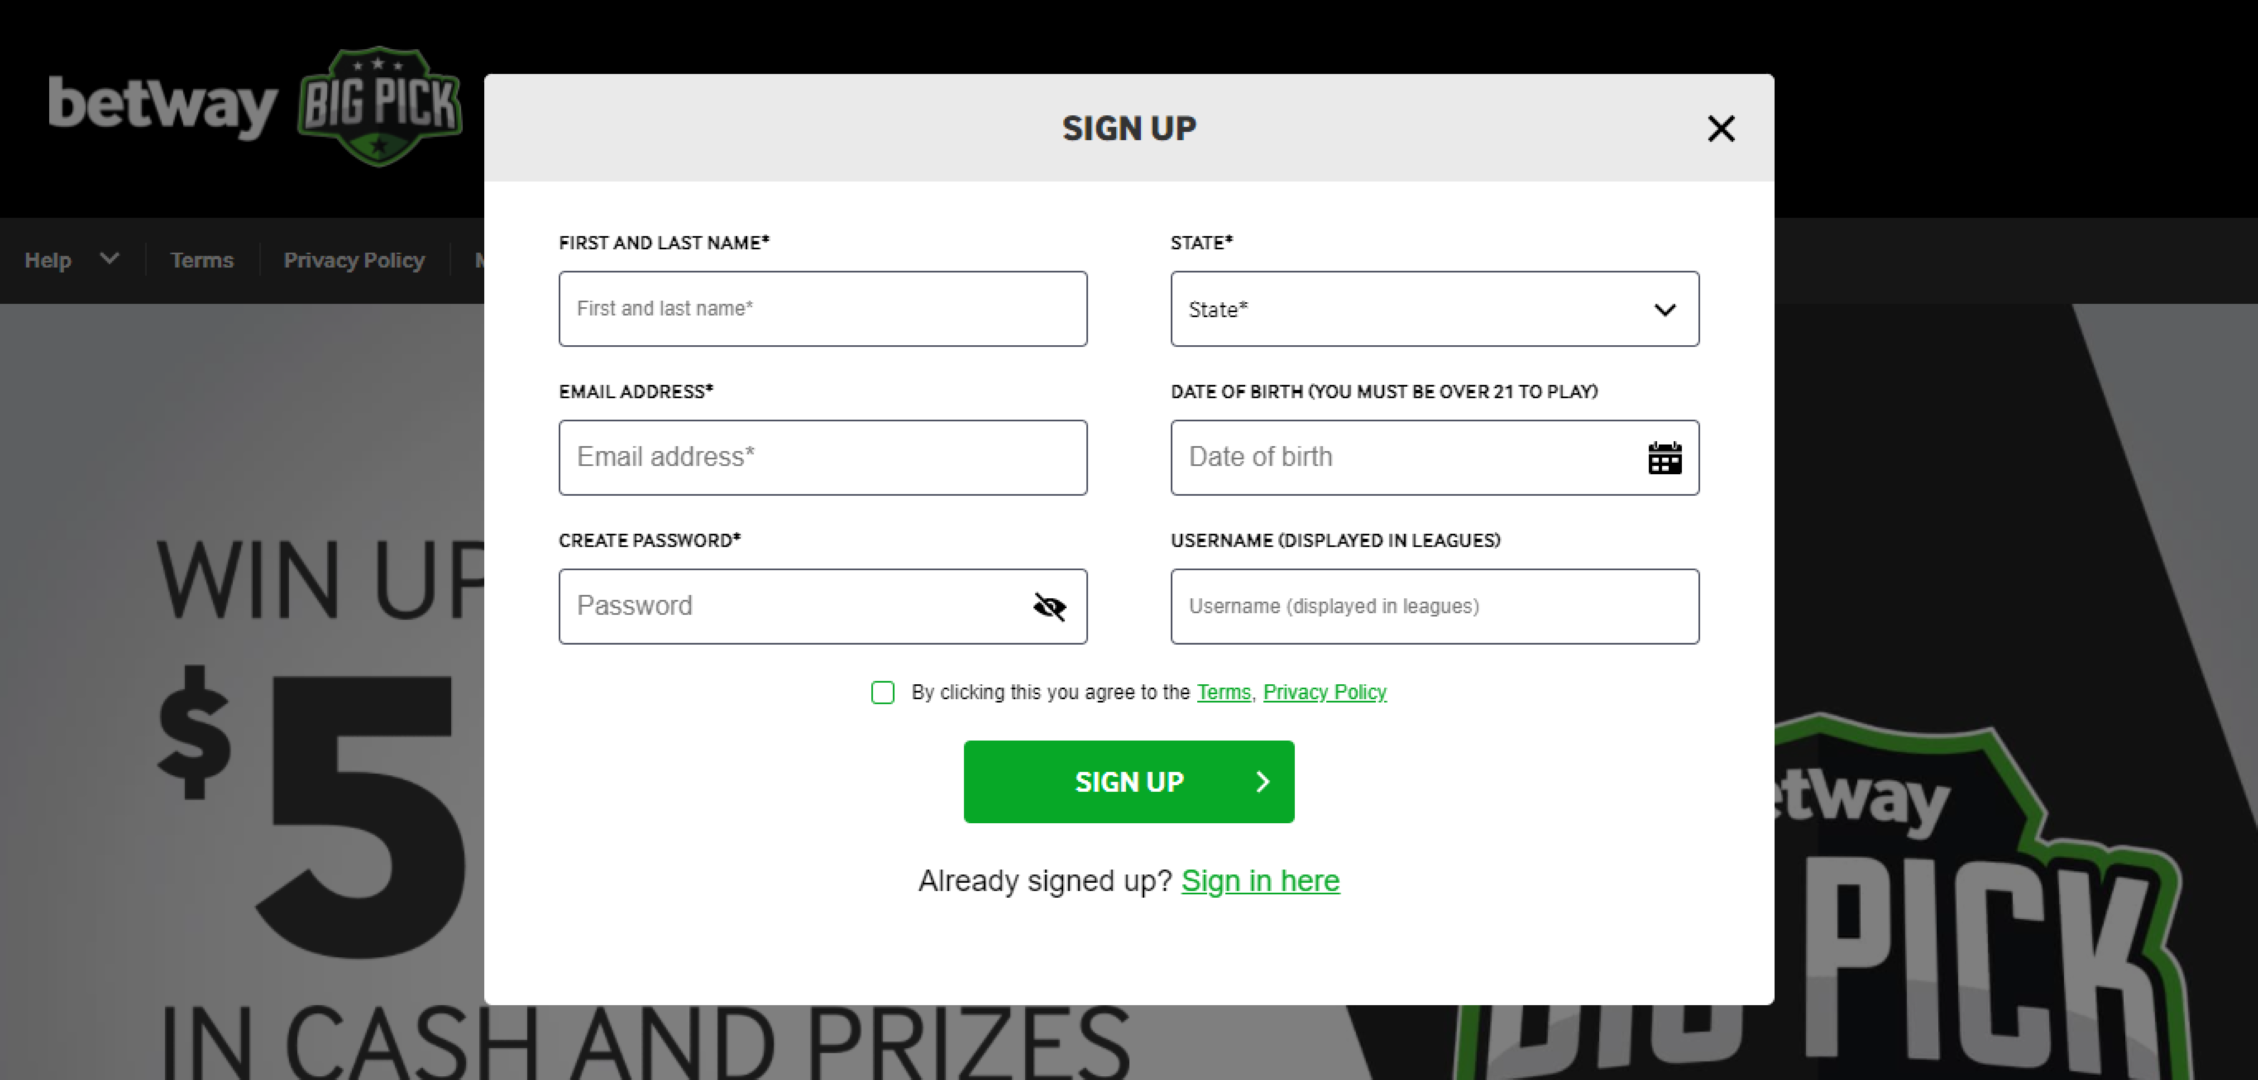 Sign-up Betway